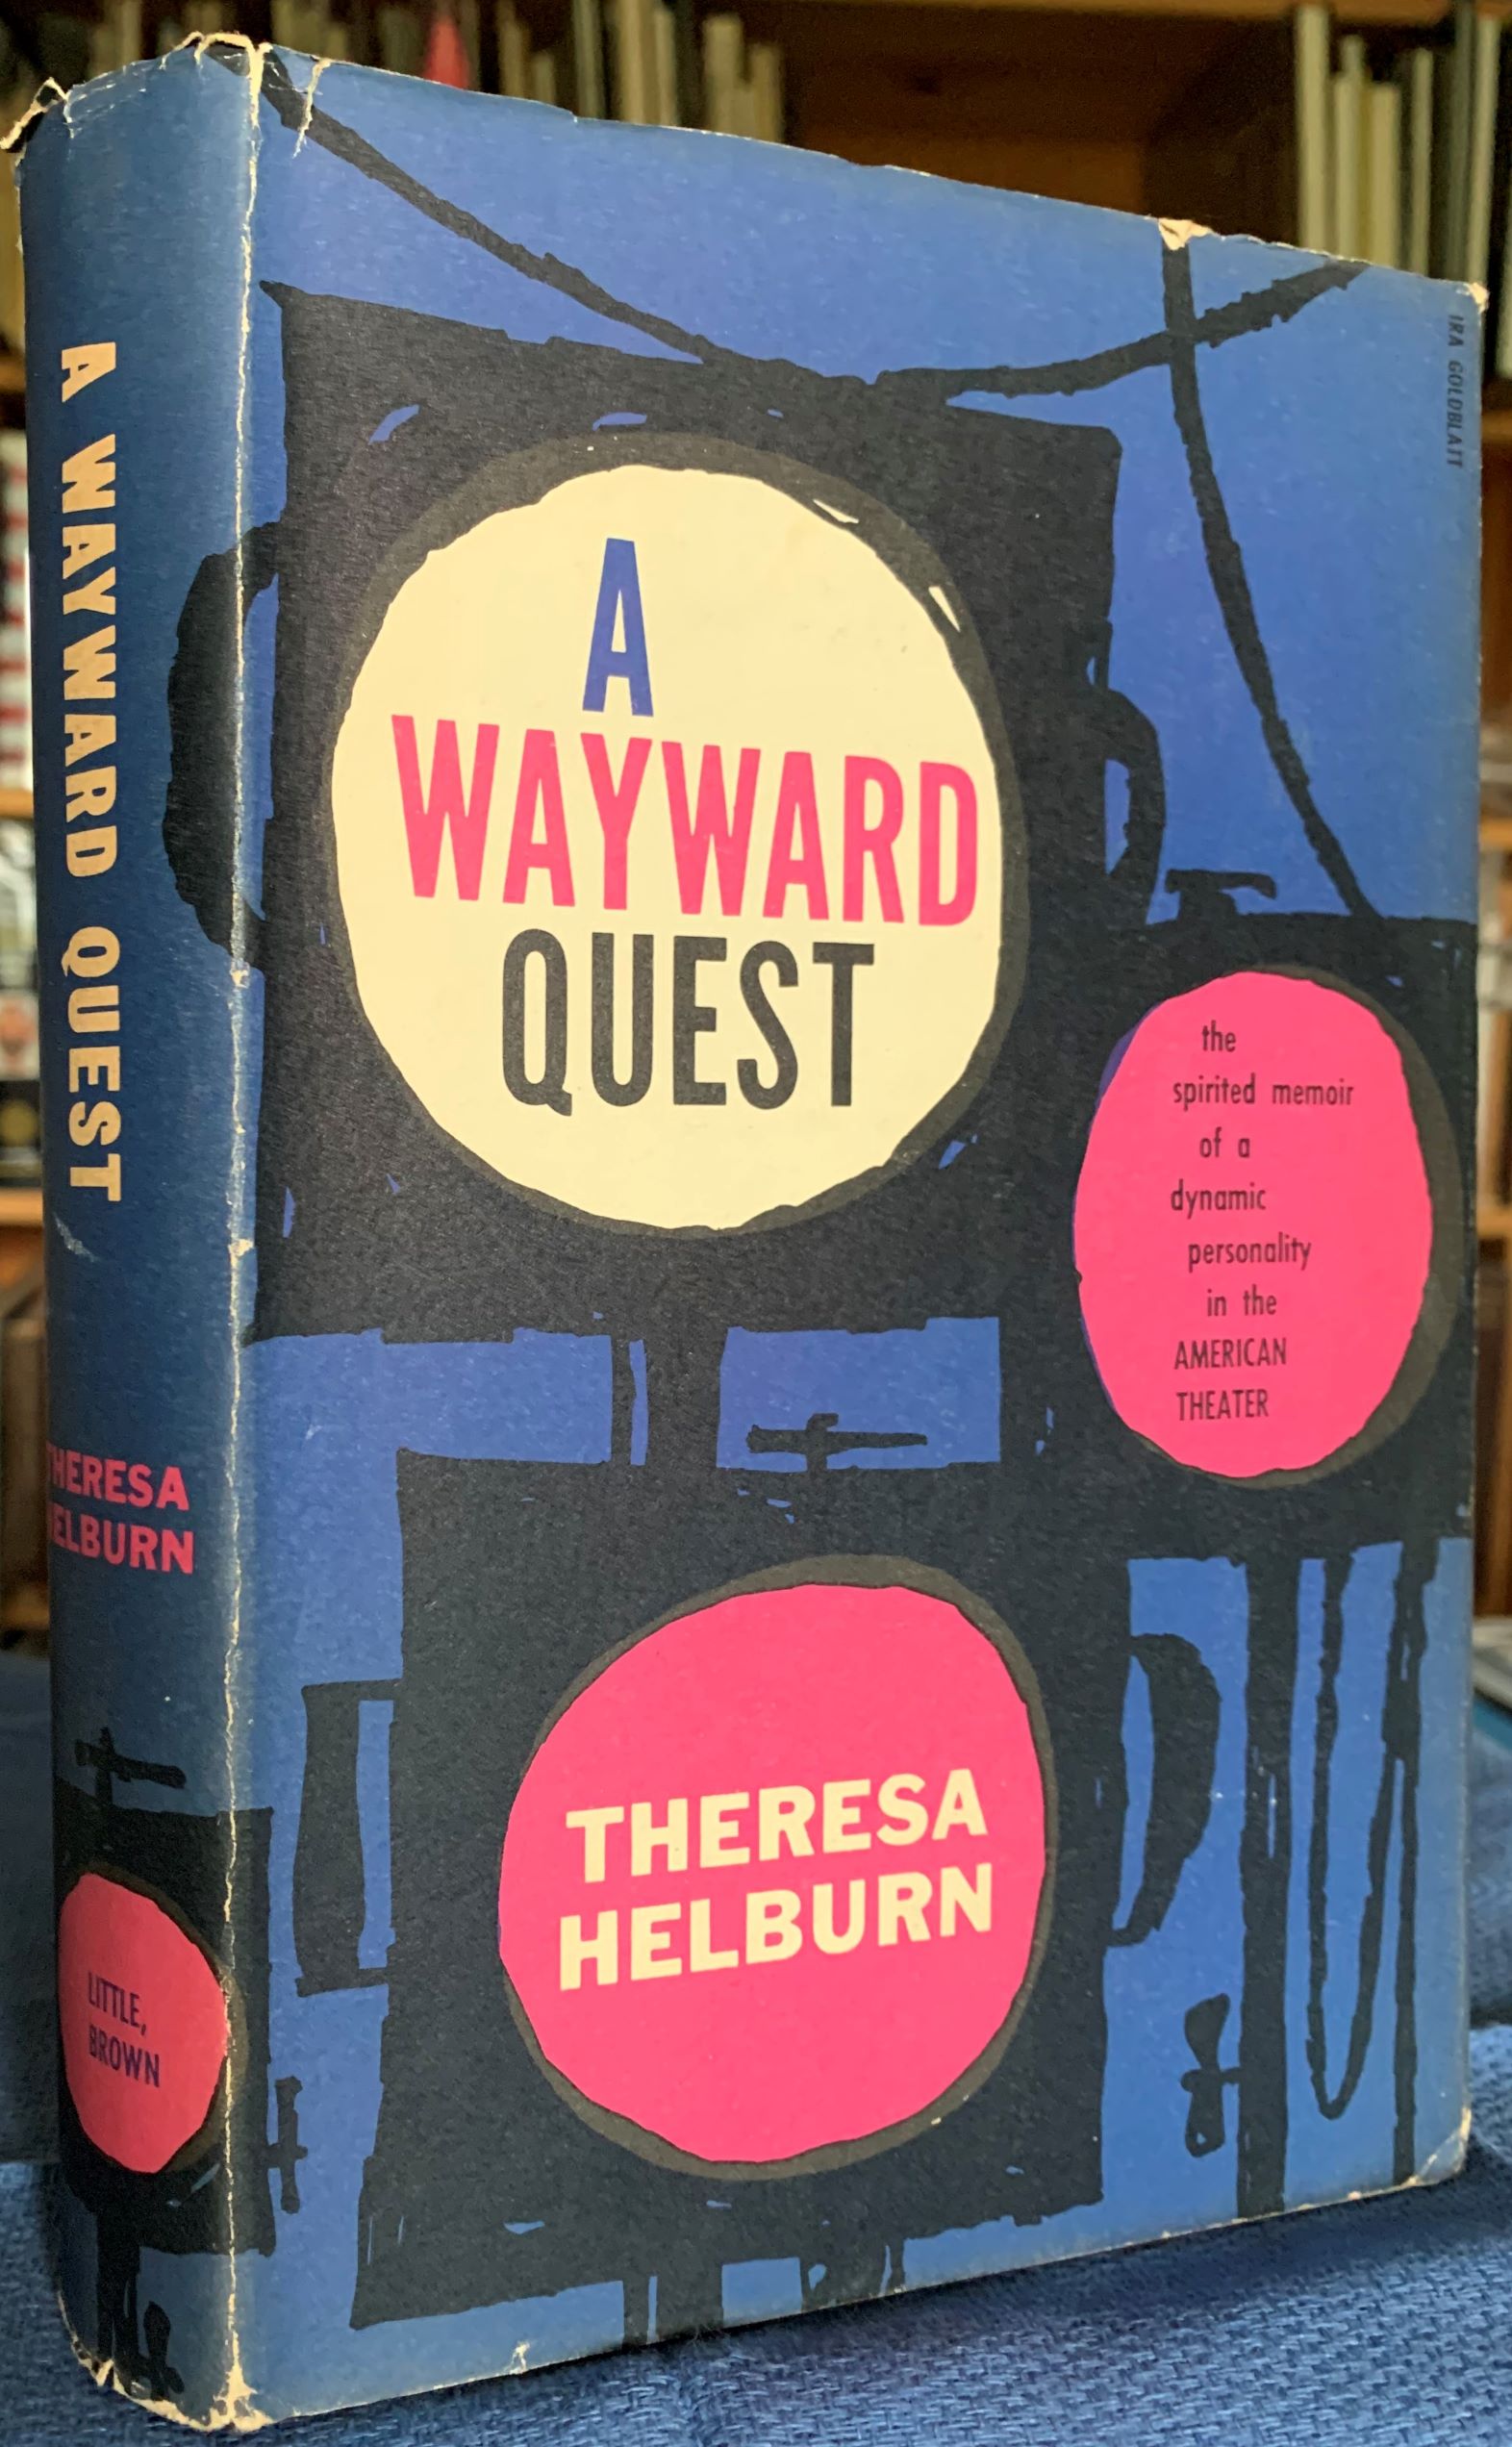 Image for A Wayward Quest, The Autobiography of Theresa Helburn.